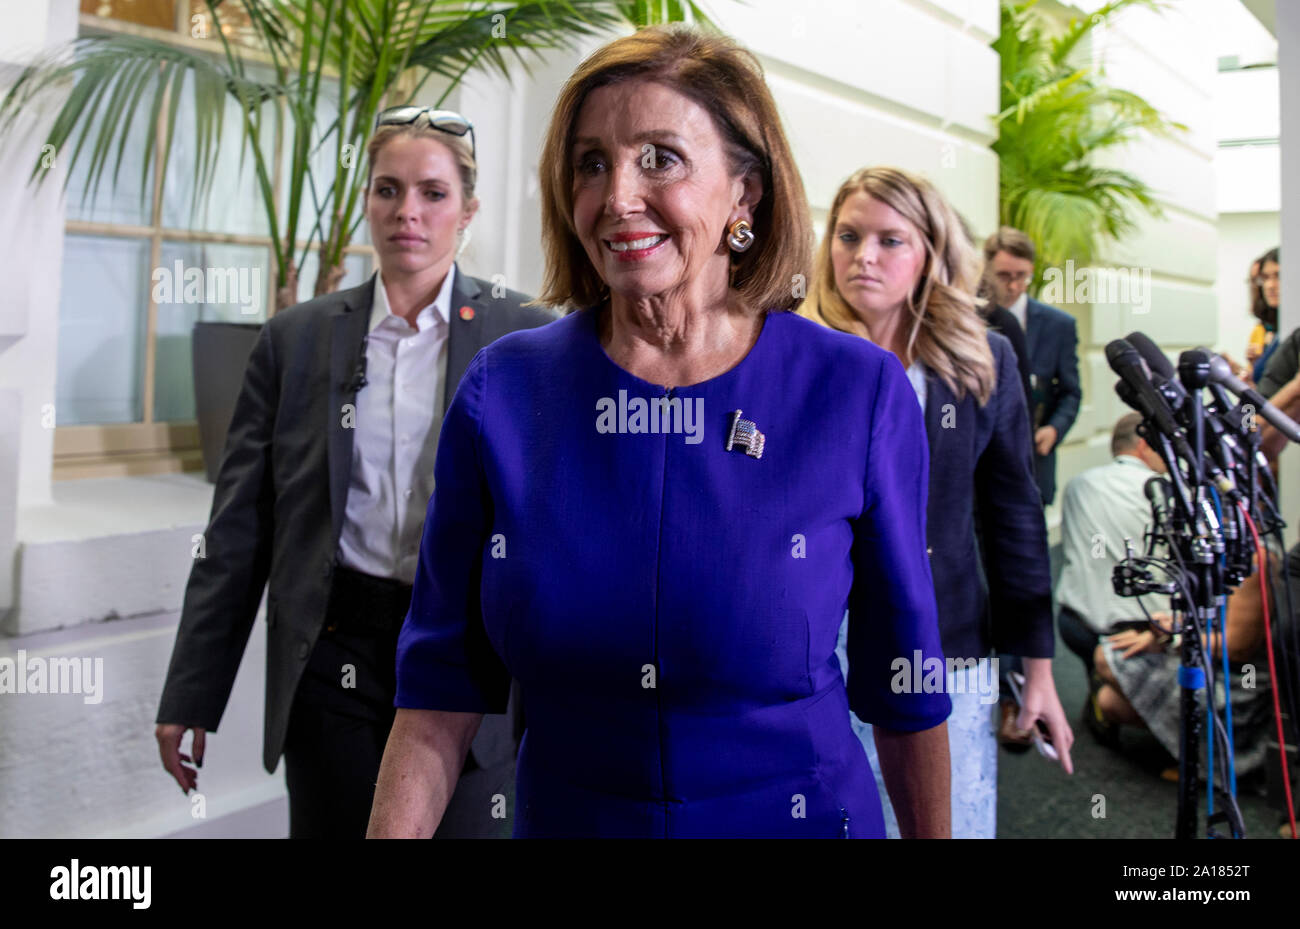 Washington, United States Of America. 24th Sep, 2019. WASHINGTON, DC: Speaker of the United States House of Representatives Nancy Pelosi (Democrat of California) after attending a meeting with the House Democratic caucus after talking the possible impeachment of US President Donald J. Trump on Capitol Hill on September 24, 2019. Credit: Tasos Katopodis/CNP Photo via Credit: Newscom/Alamy Live News Stock Photo